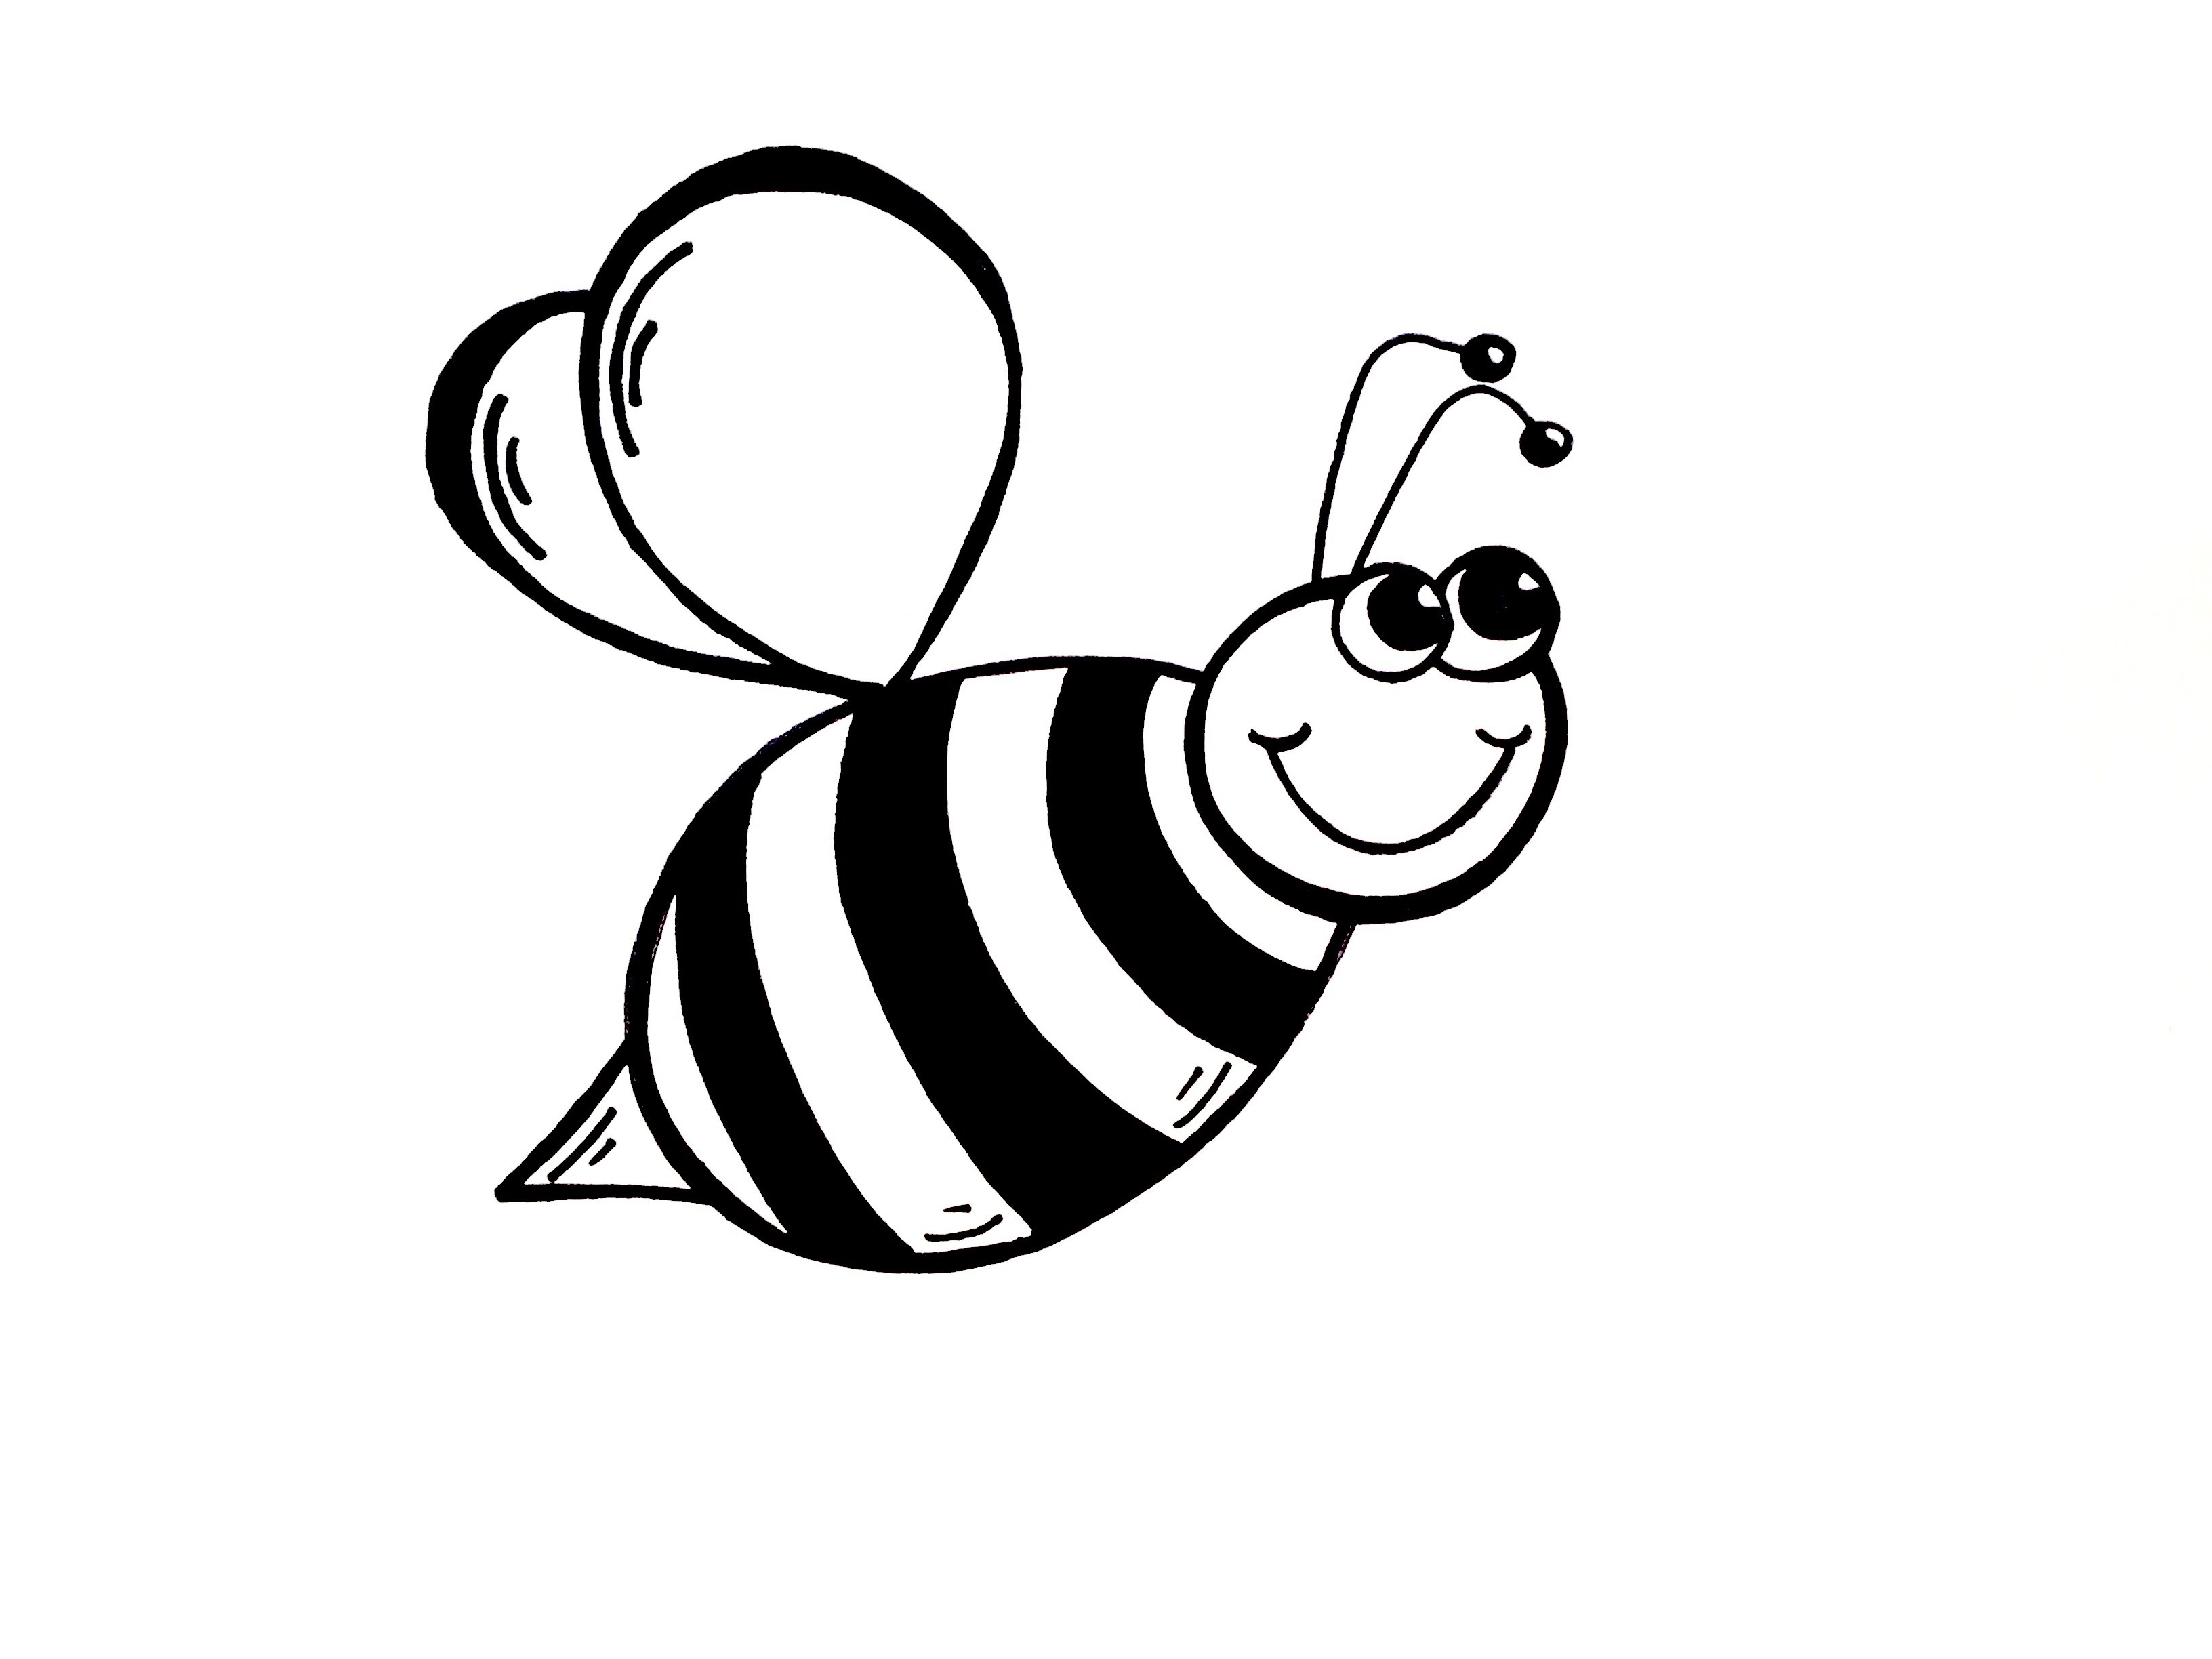 3264x2448 bumble bee drawing cartoon drawing lesson how to draw a bumble be...